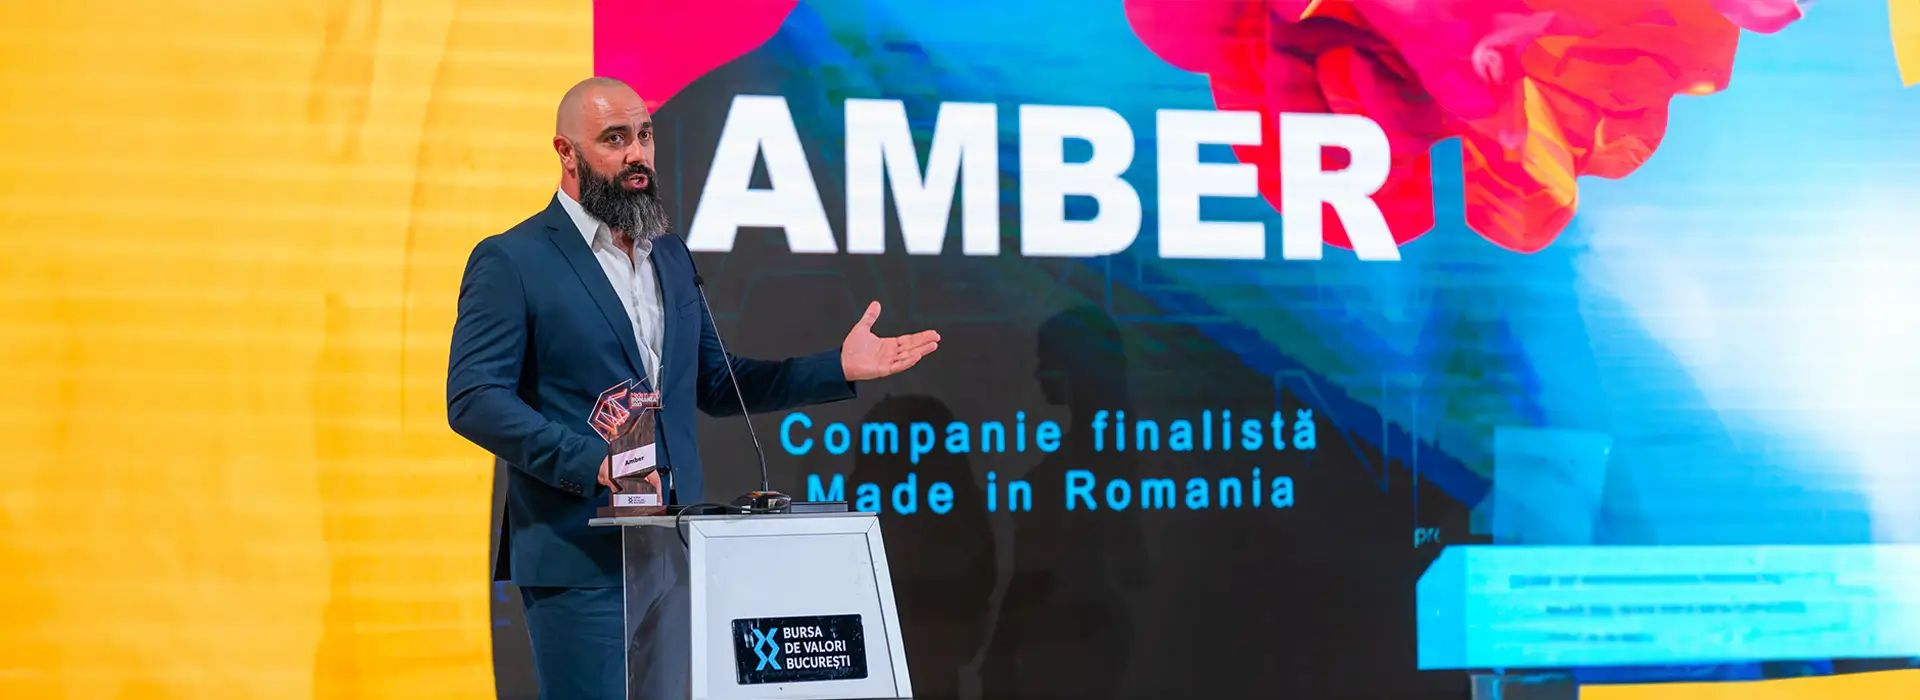 Amber is among the 15 finalists of the prestigious 'Made in Romania' entrepreneurial program, announced by the Bucharest Stock Exchange (BVB)